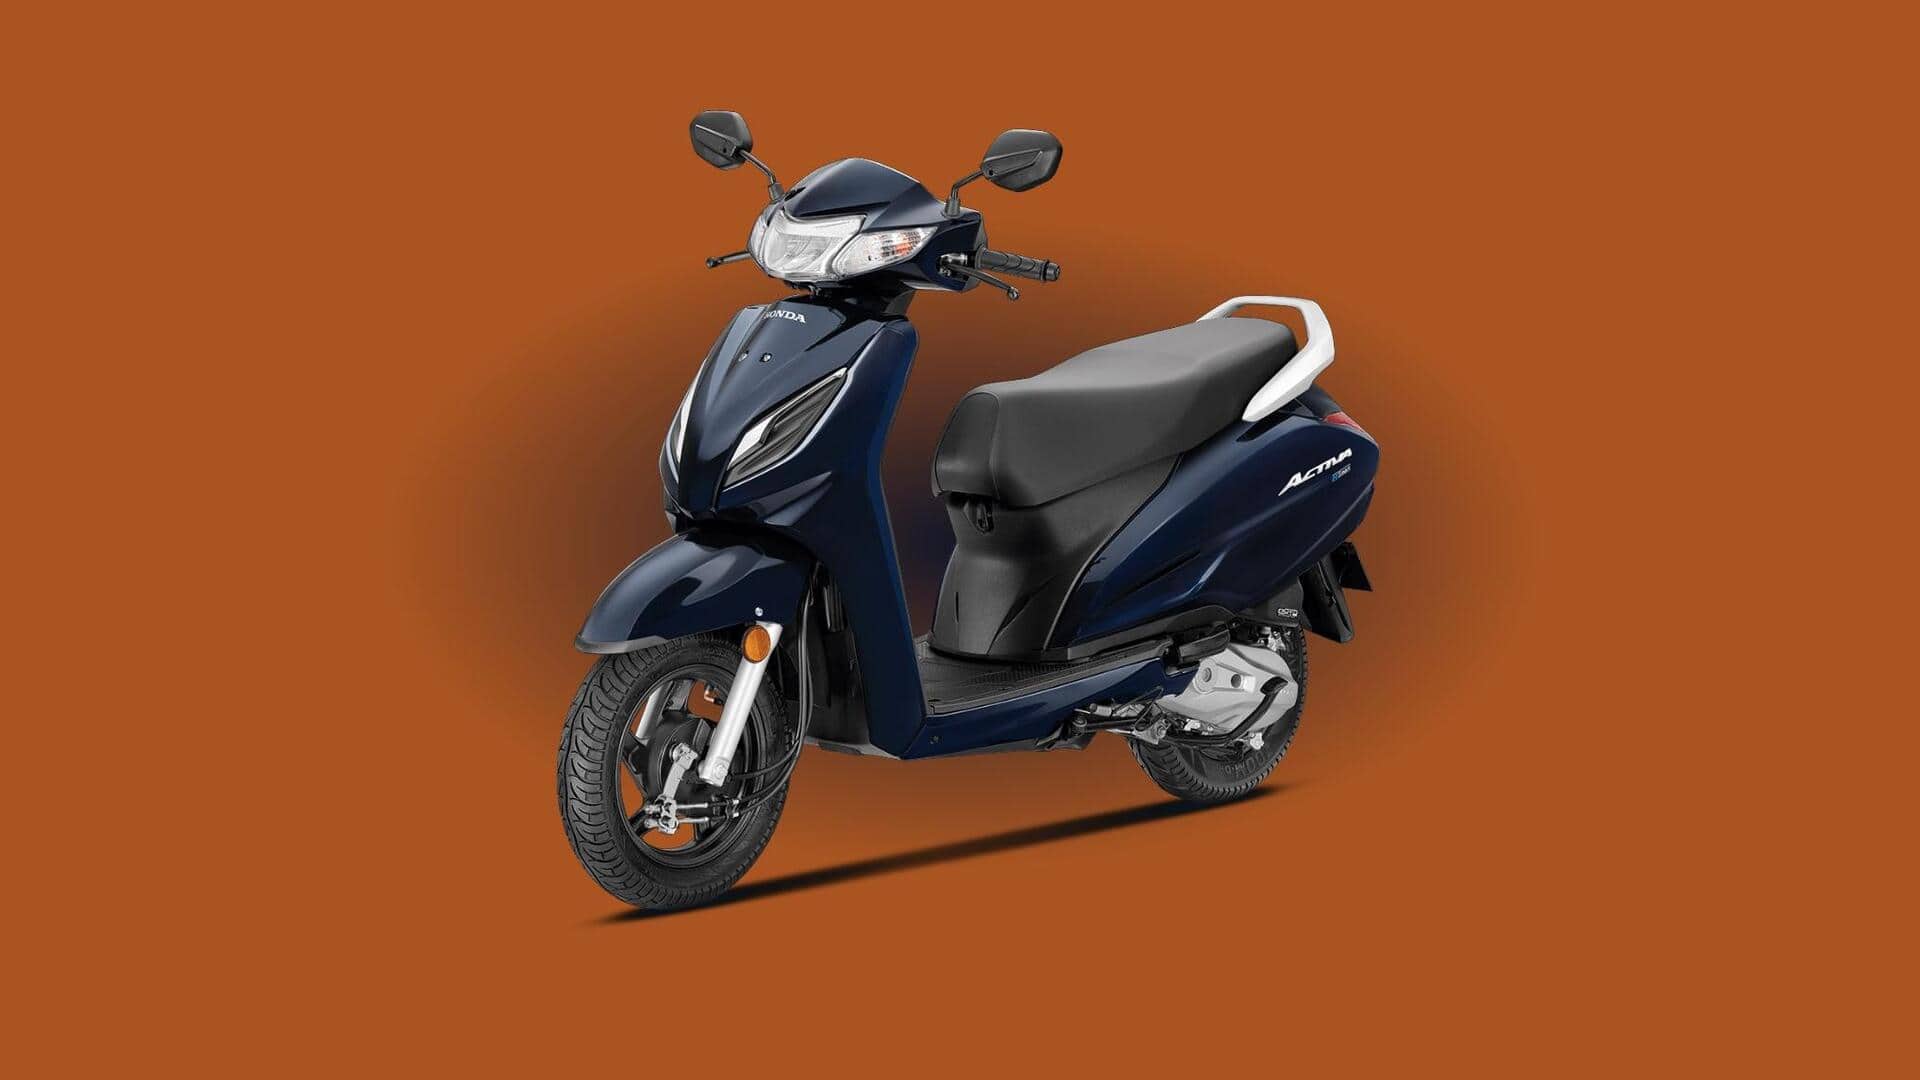 Honda Activa Limited Edition debuts in India at Rs. 81,000